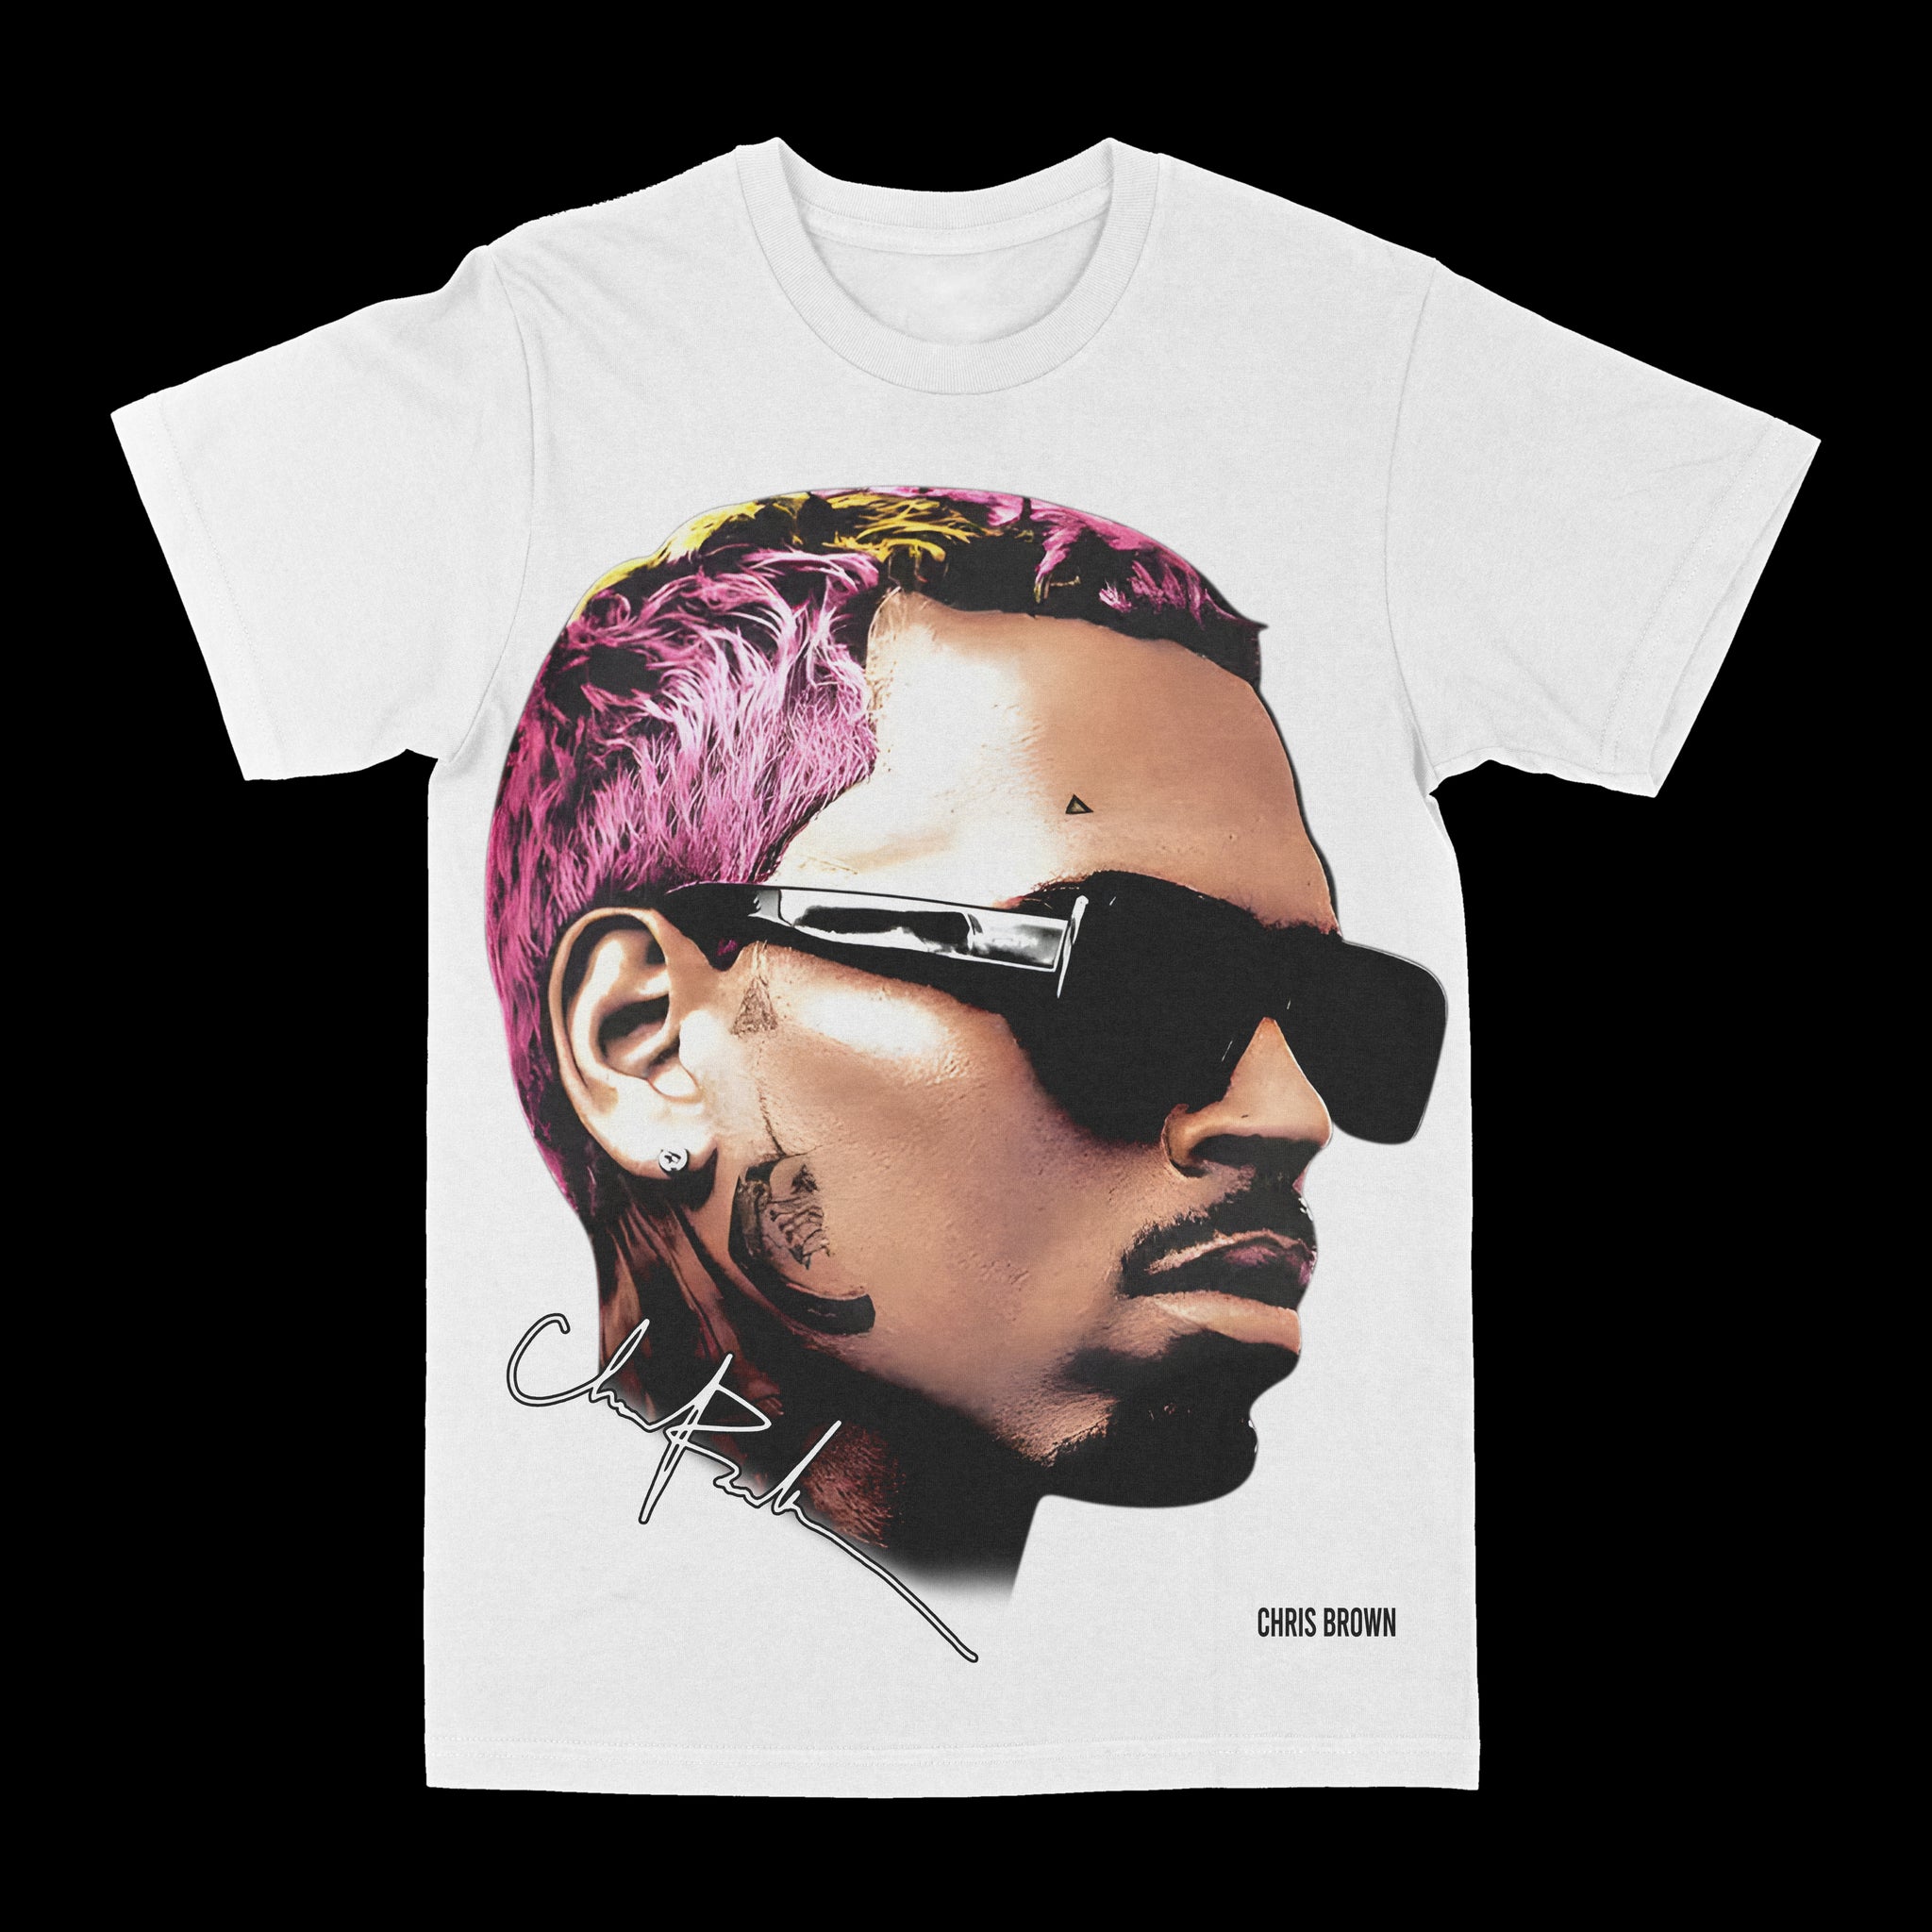 Chris Brown "Big Face" Graphic Tee